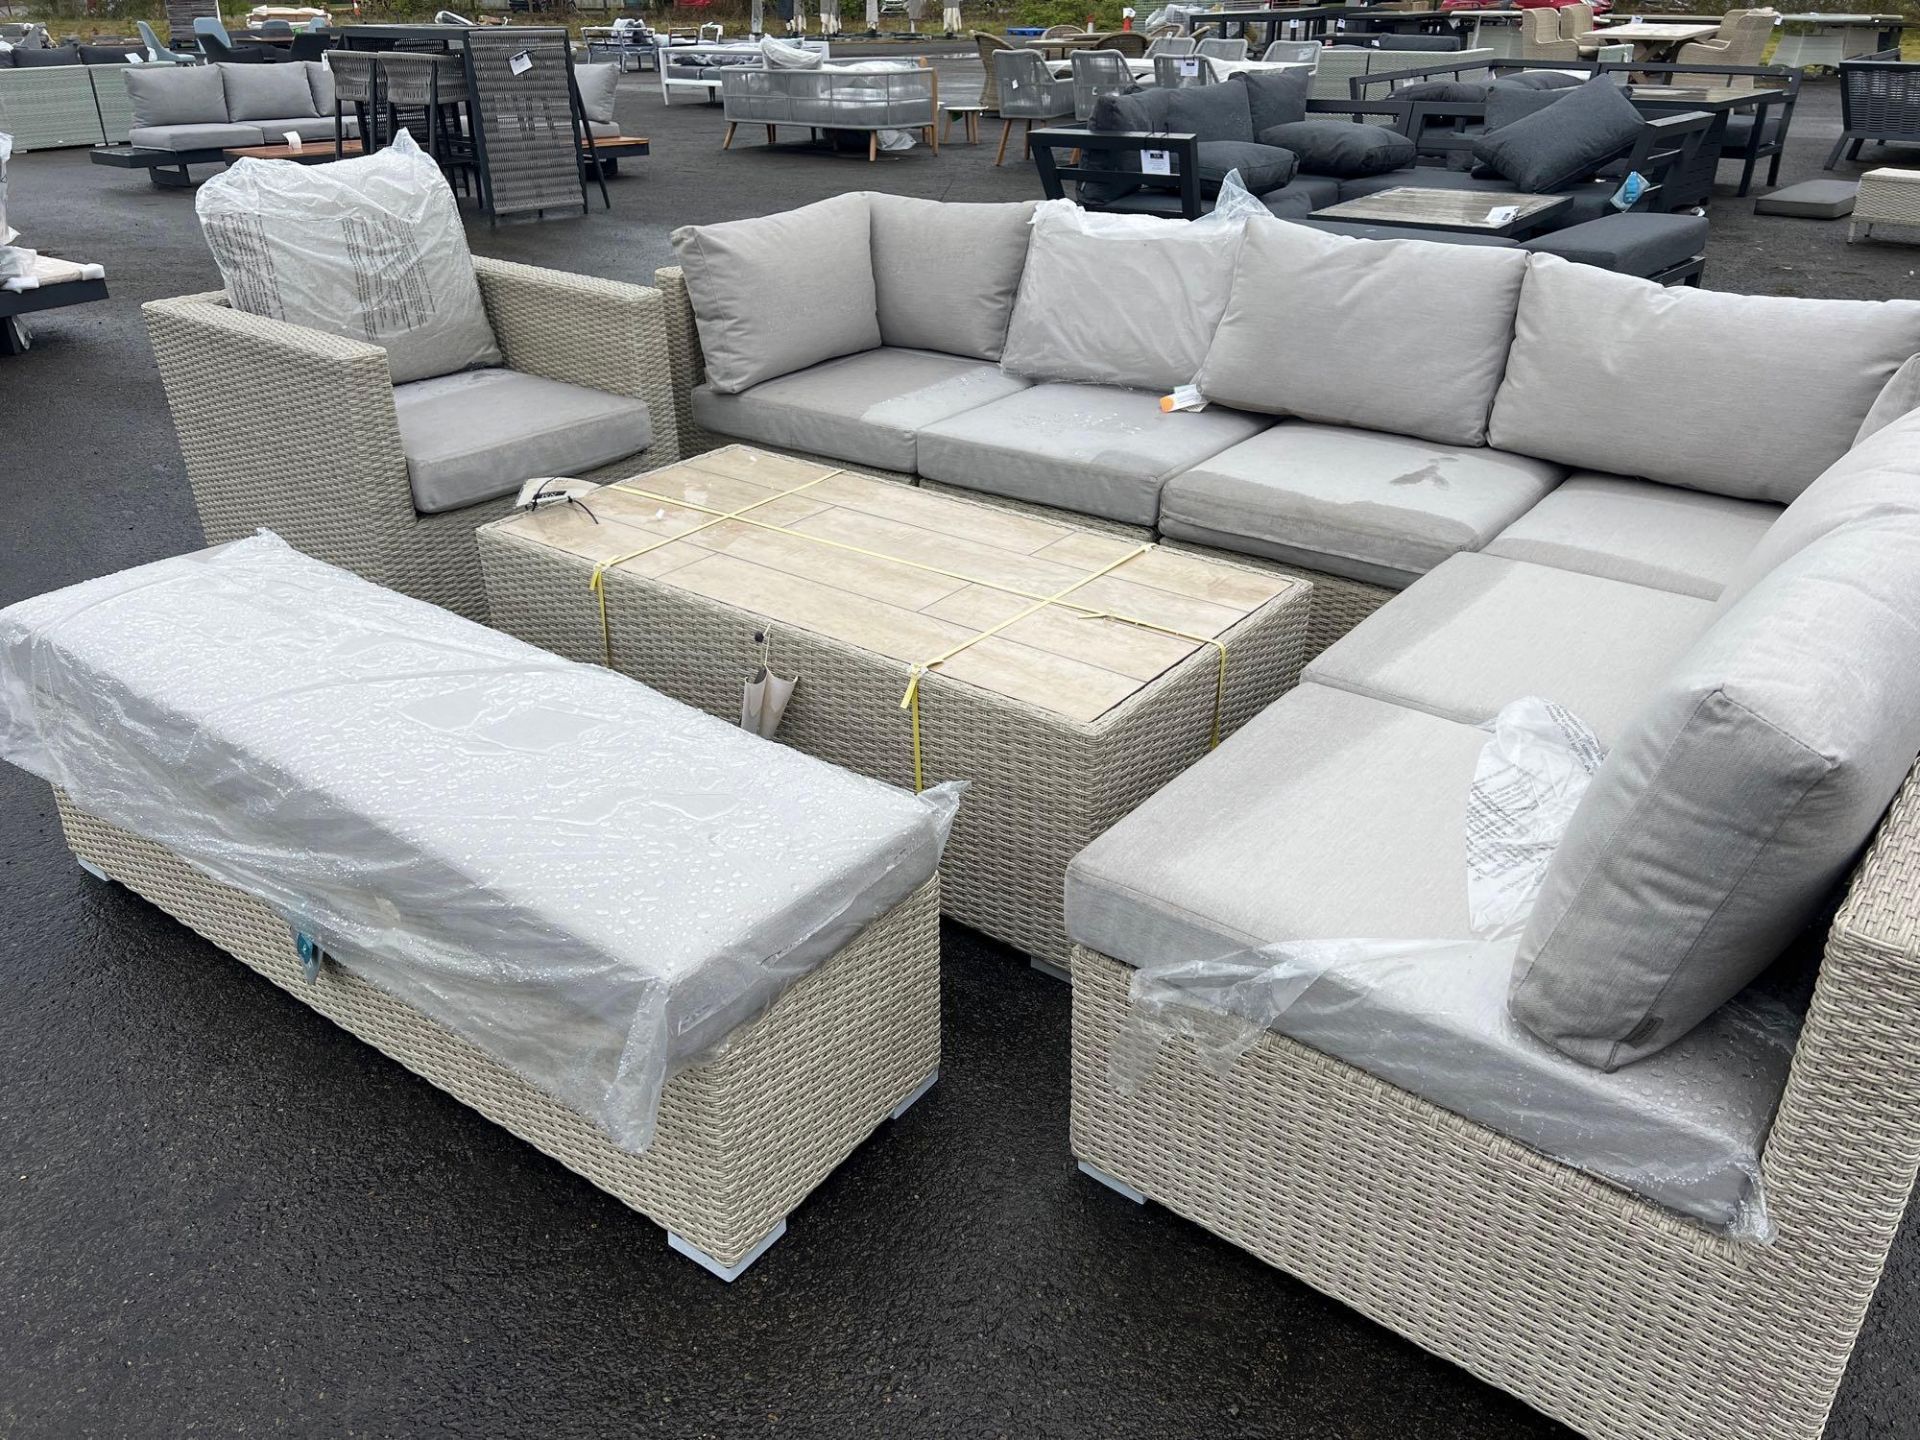 A100 Kingscote Modular Sofa with large coffee table and chair - Nutmeg Elevate your outdoor living - Image 2 of 4